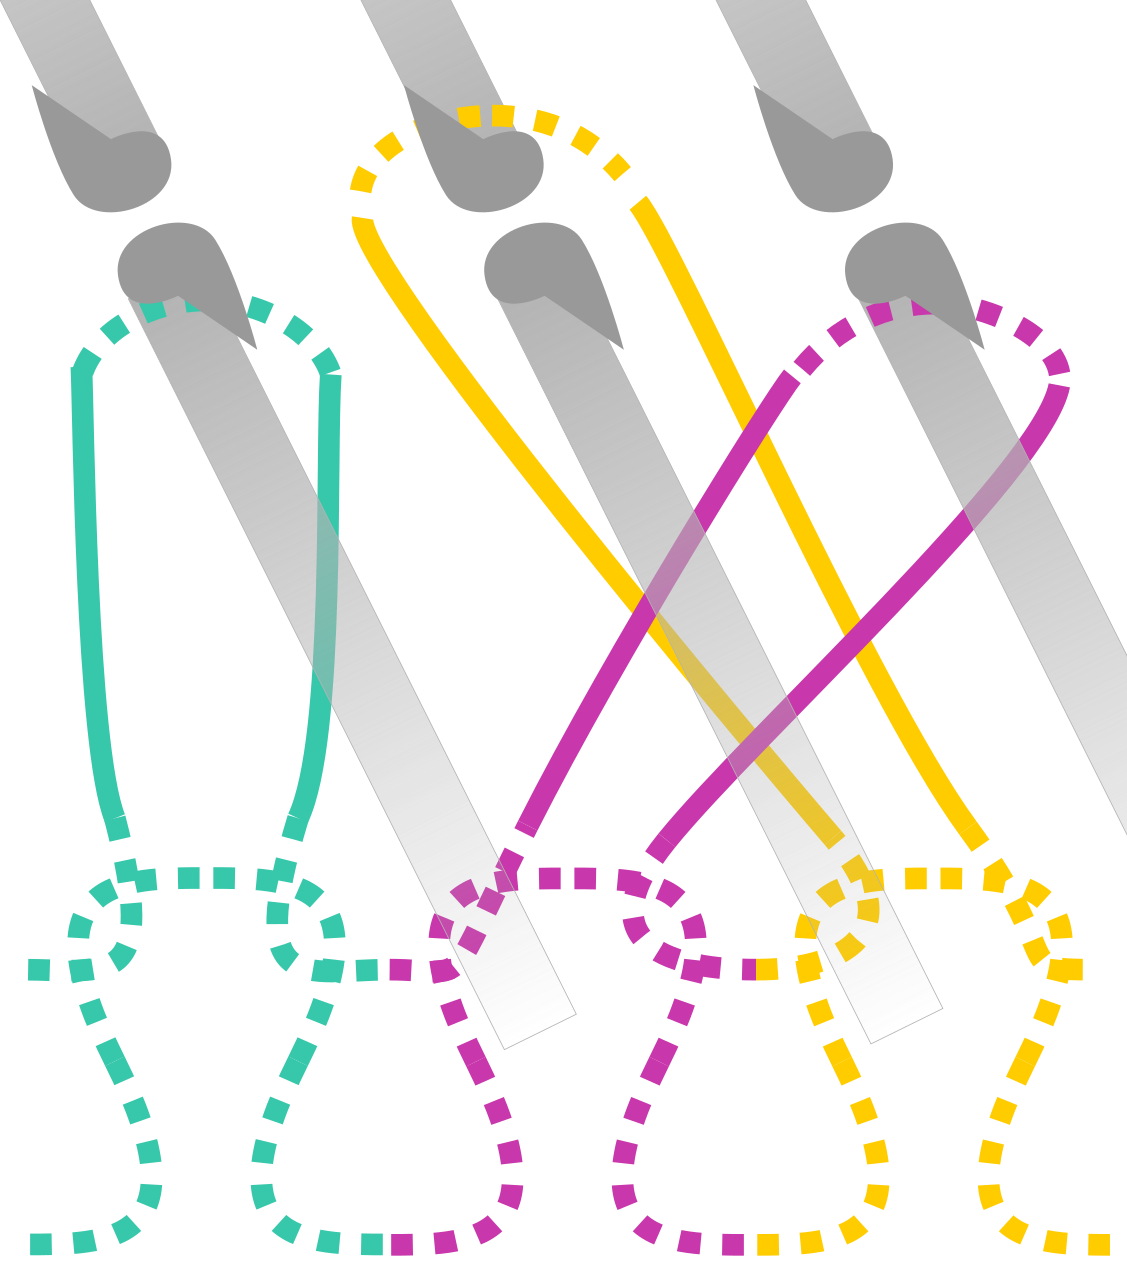 same three loops simplified to emphasize the braid-like structure